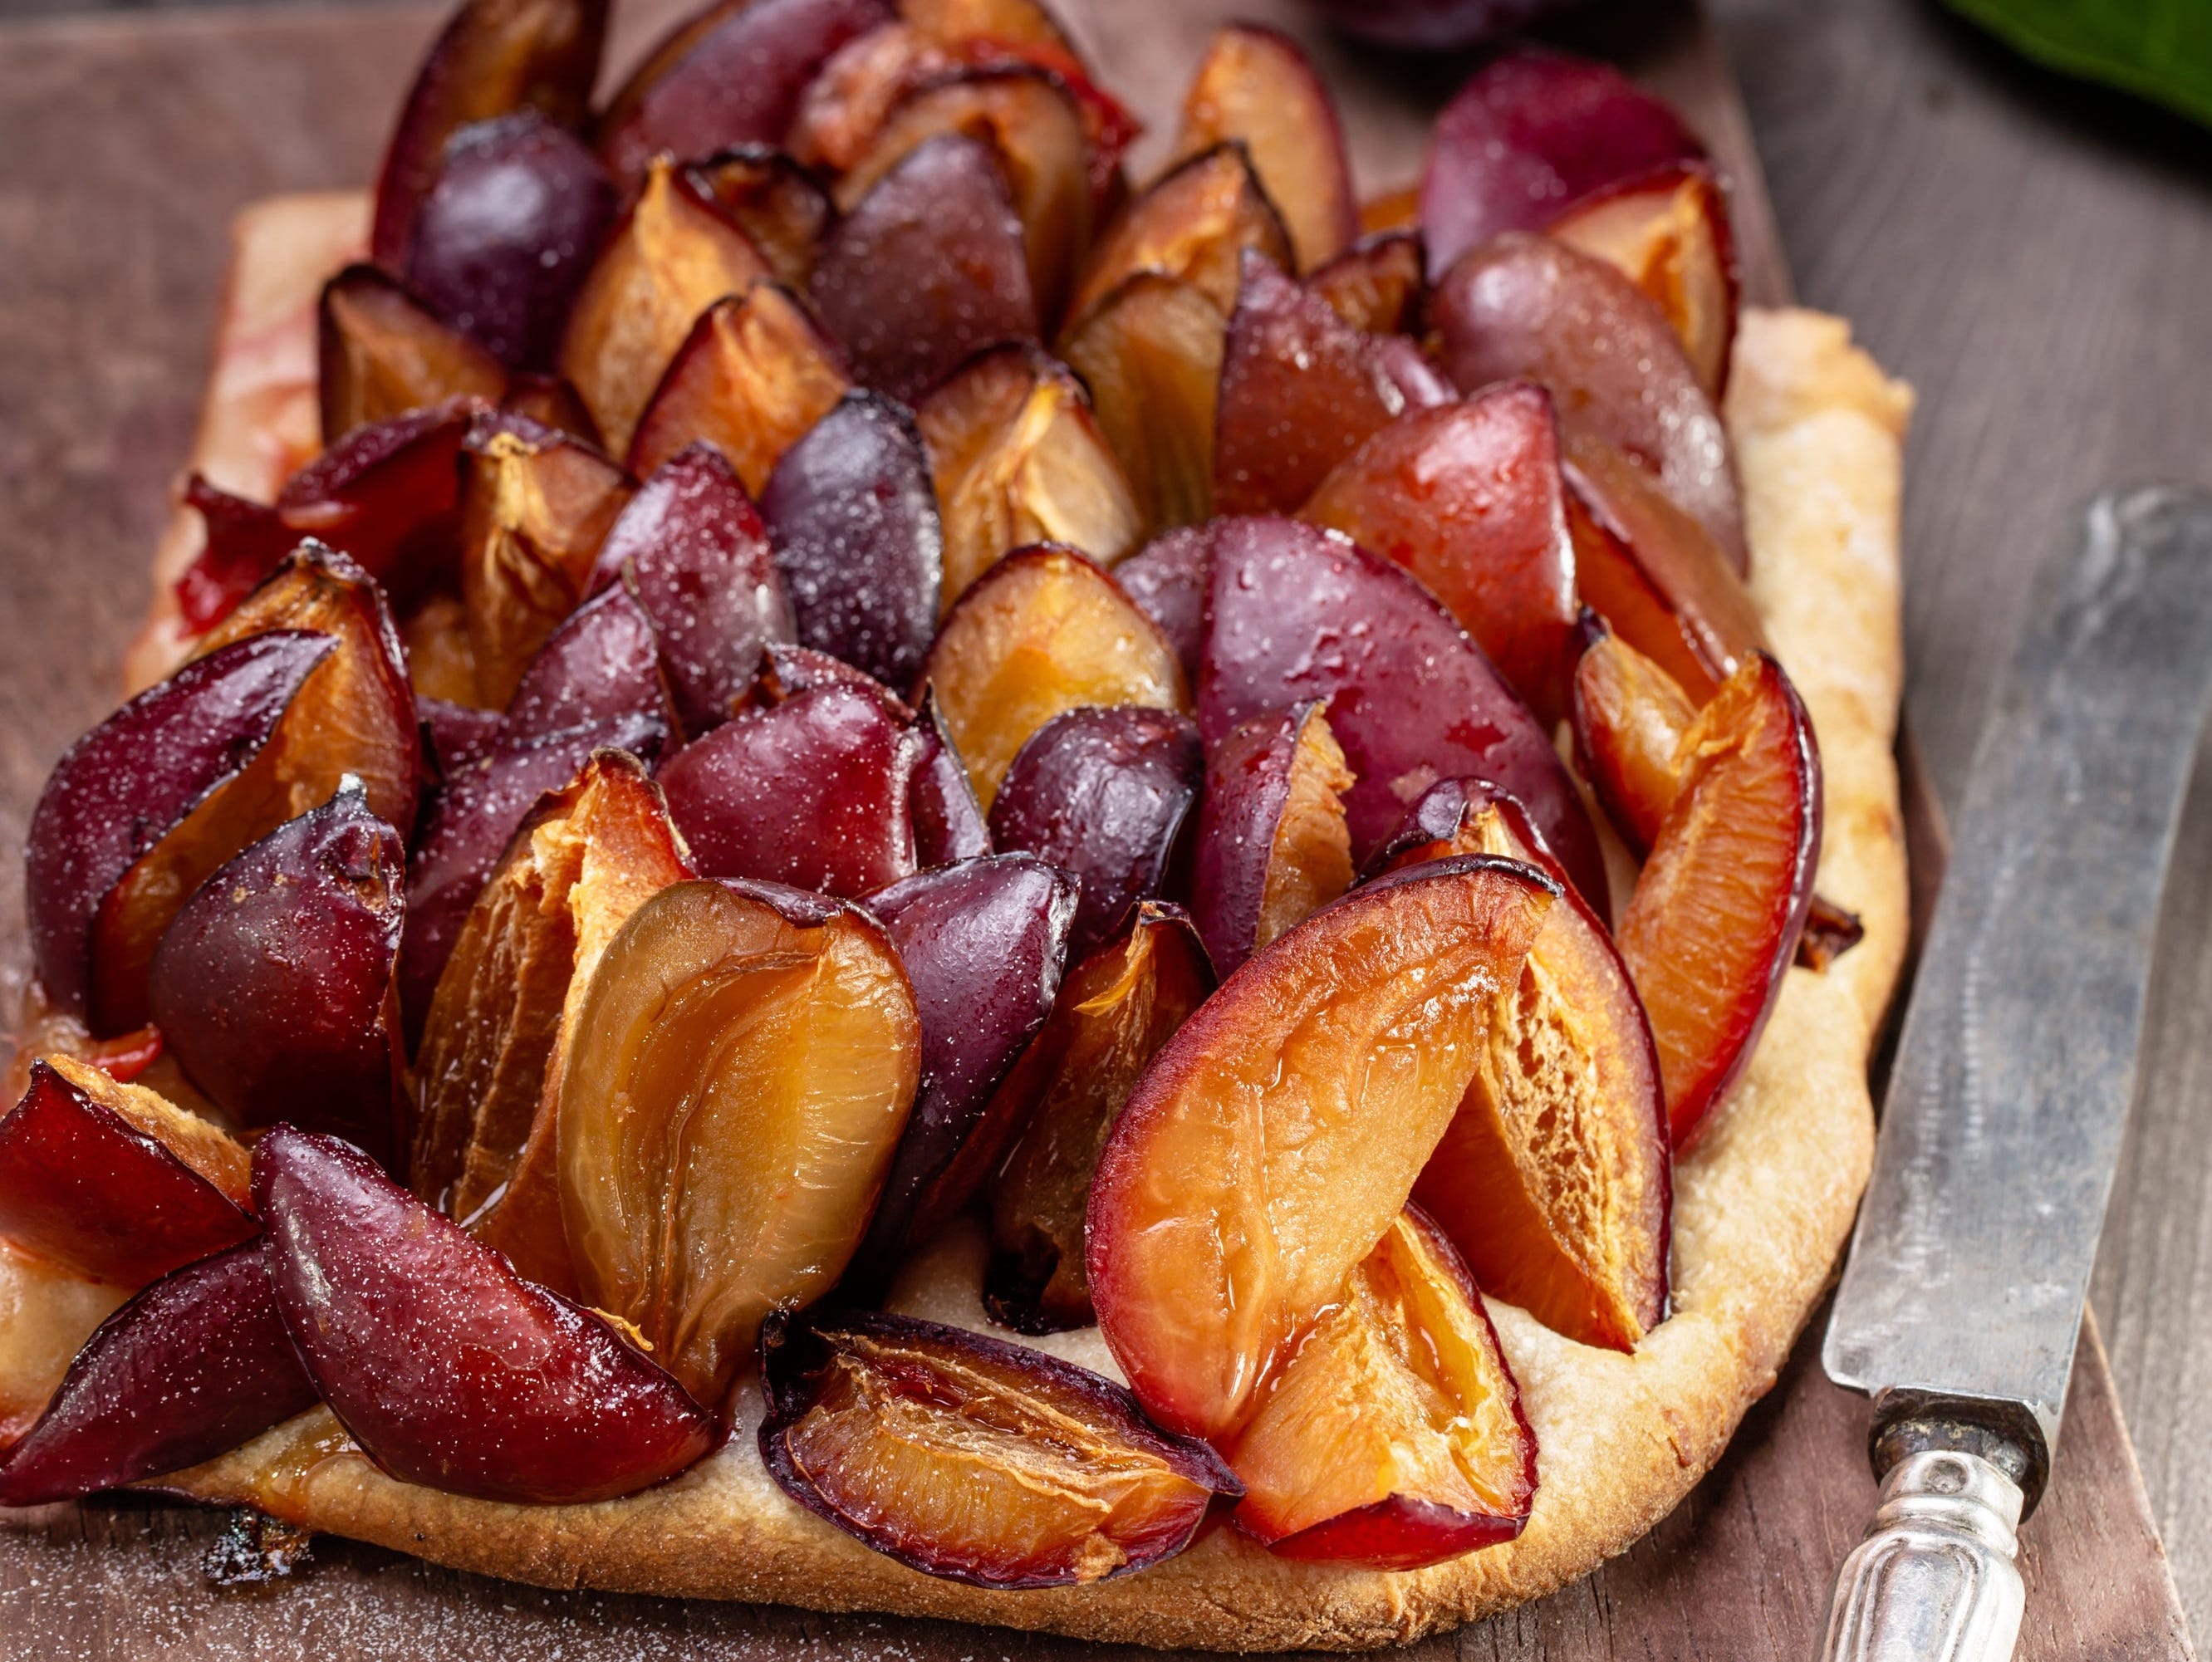 <p>If you're <a href="https://www.insider.com/fruits-around-the-world-2018-7">a fan of plums</a>, you'll love this German pastry.</p><p><a href="https://www.theguardian.com/food/2018/sep/05/how-to-make-the-perfect-german-plum-cake">According to The Guardian</a>, zwetschgenkuchen (also known as quetschekuche, pflaumenkuchen, or zwetschgendatschi<em>) </em>is best made with either yeasted dough or shortcrust pastry, covered with small, pitted Italian plums.</p><p><a href="https://www.daringgourmet.com/zwetschgenkuchen-zwetschgendatschi-german-plum-cake/">According to Daring Gourmet</a>, some recipes also call for a sprinkling of streusel on top — a twist on the original recipe.</p>